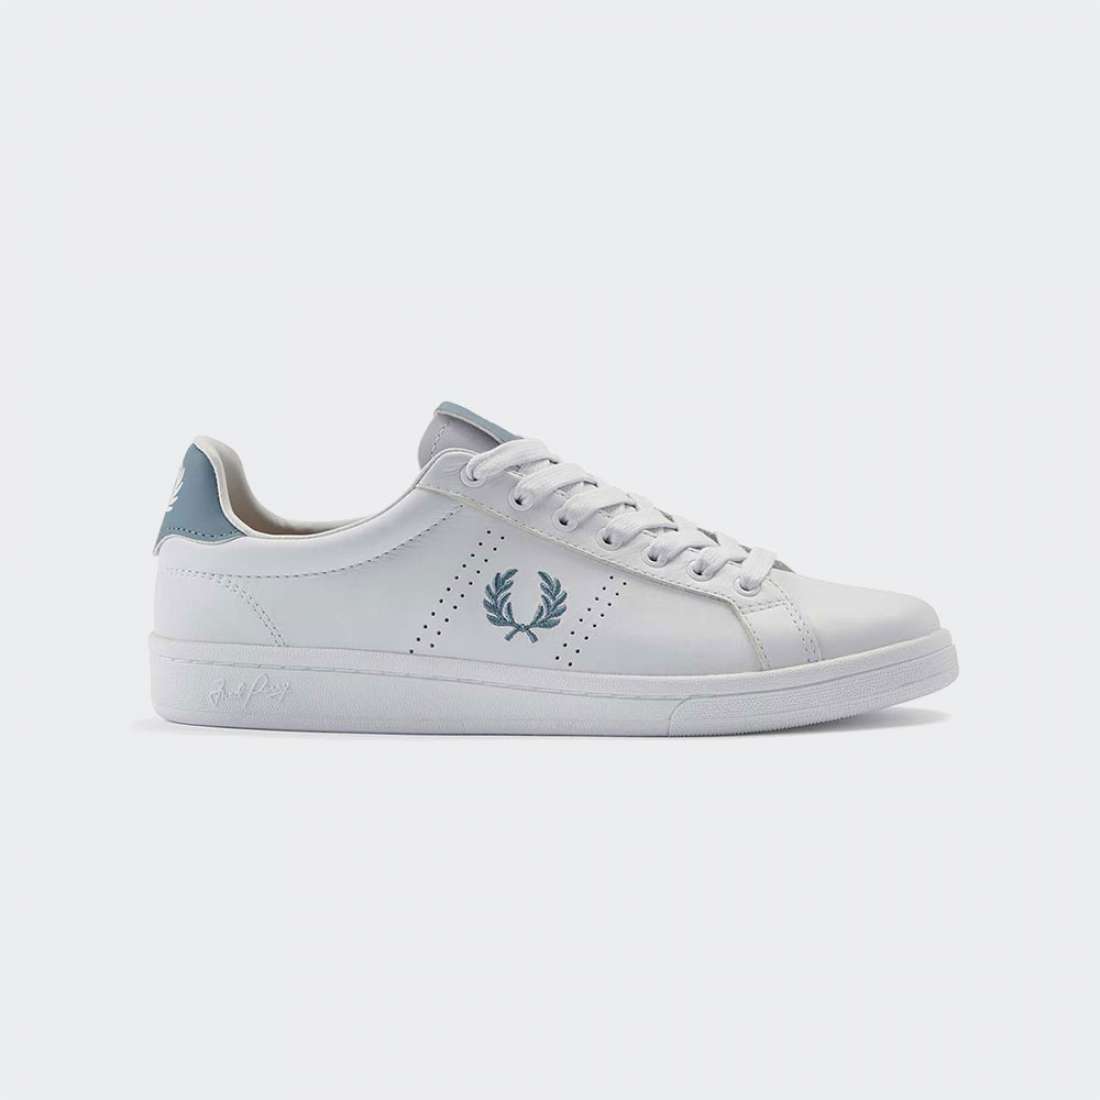 FRED PERRY B721 574